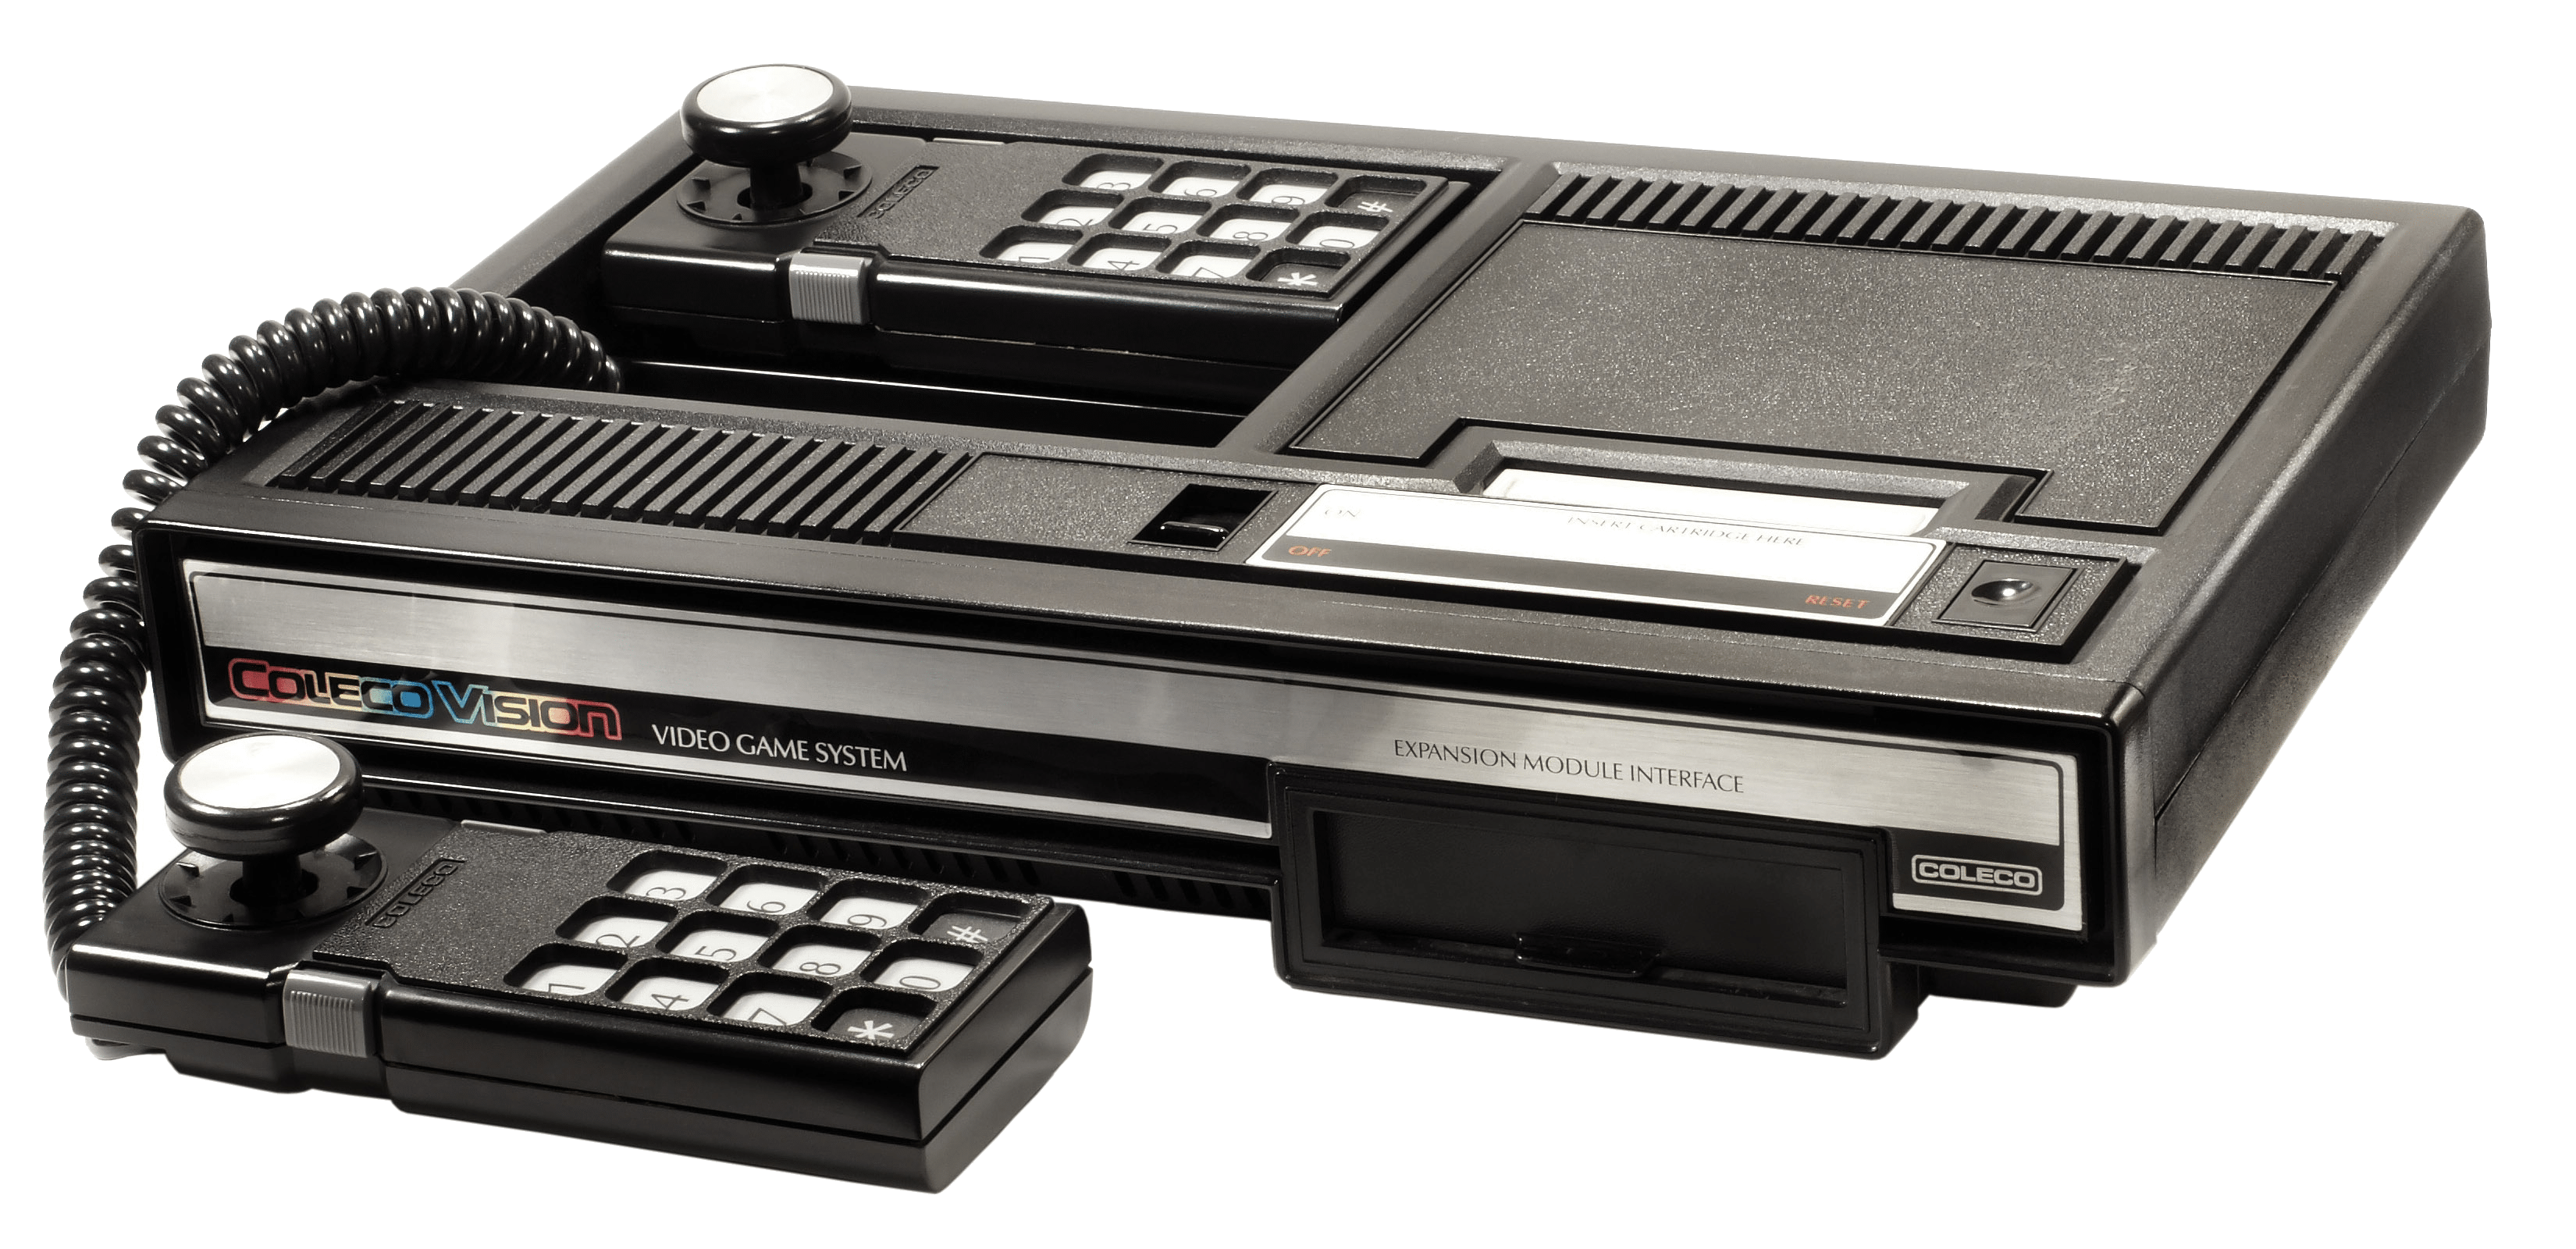 The Coleco ColecoVision home console and controller